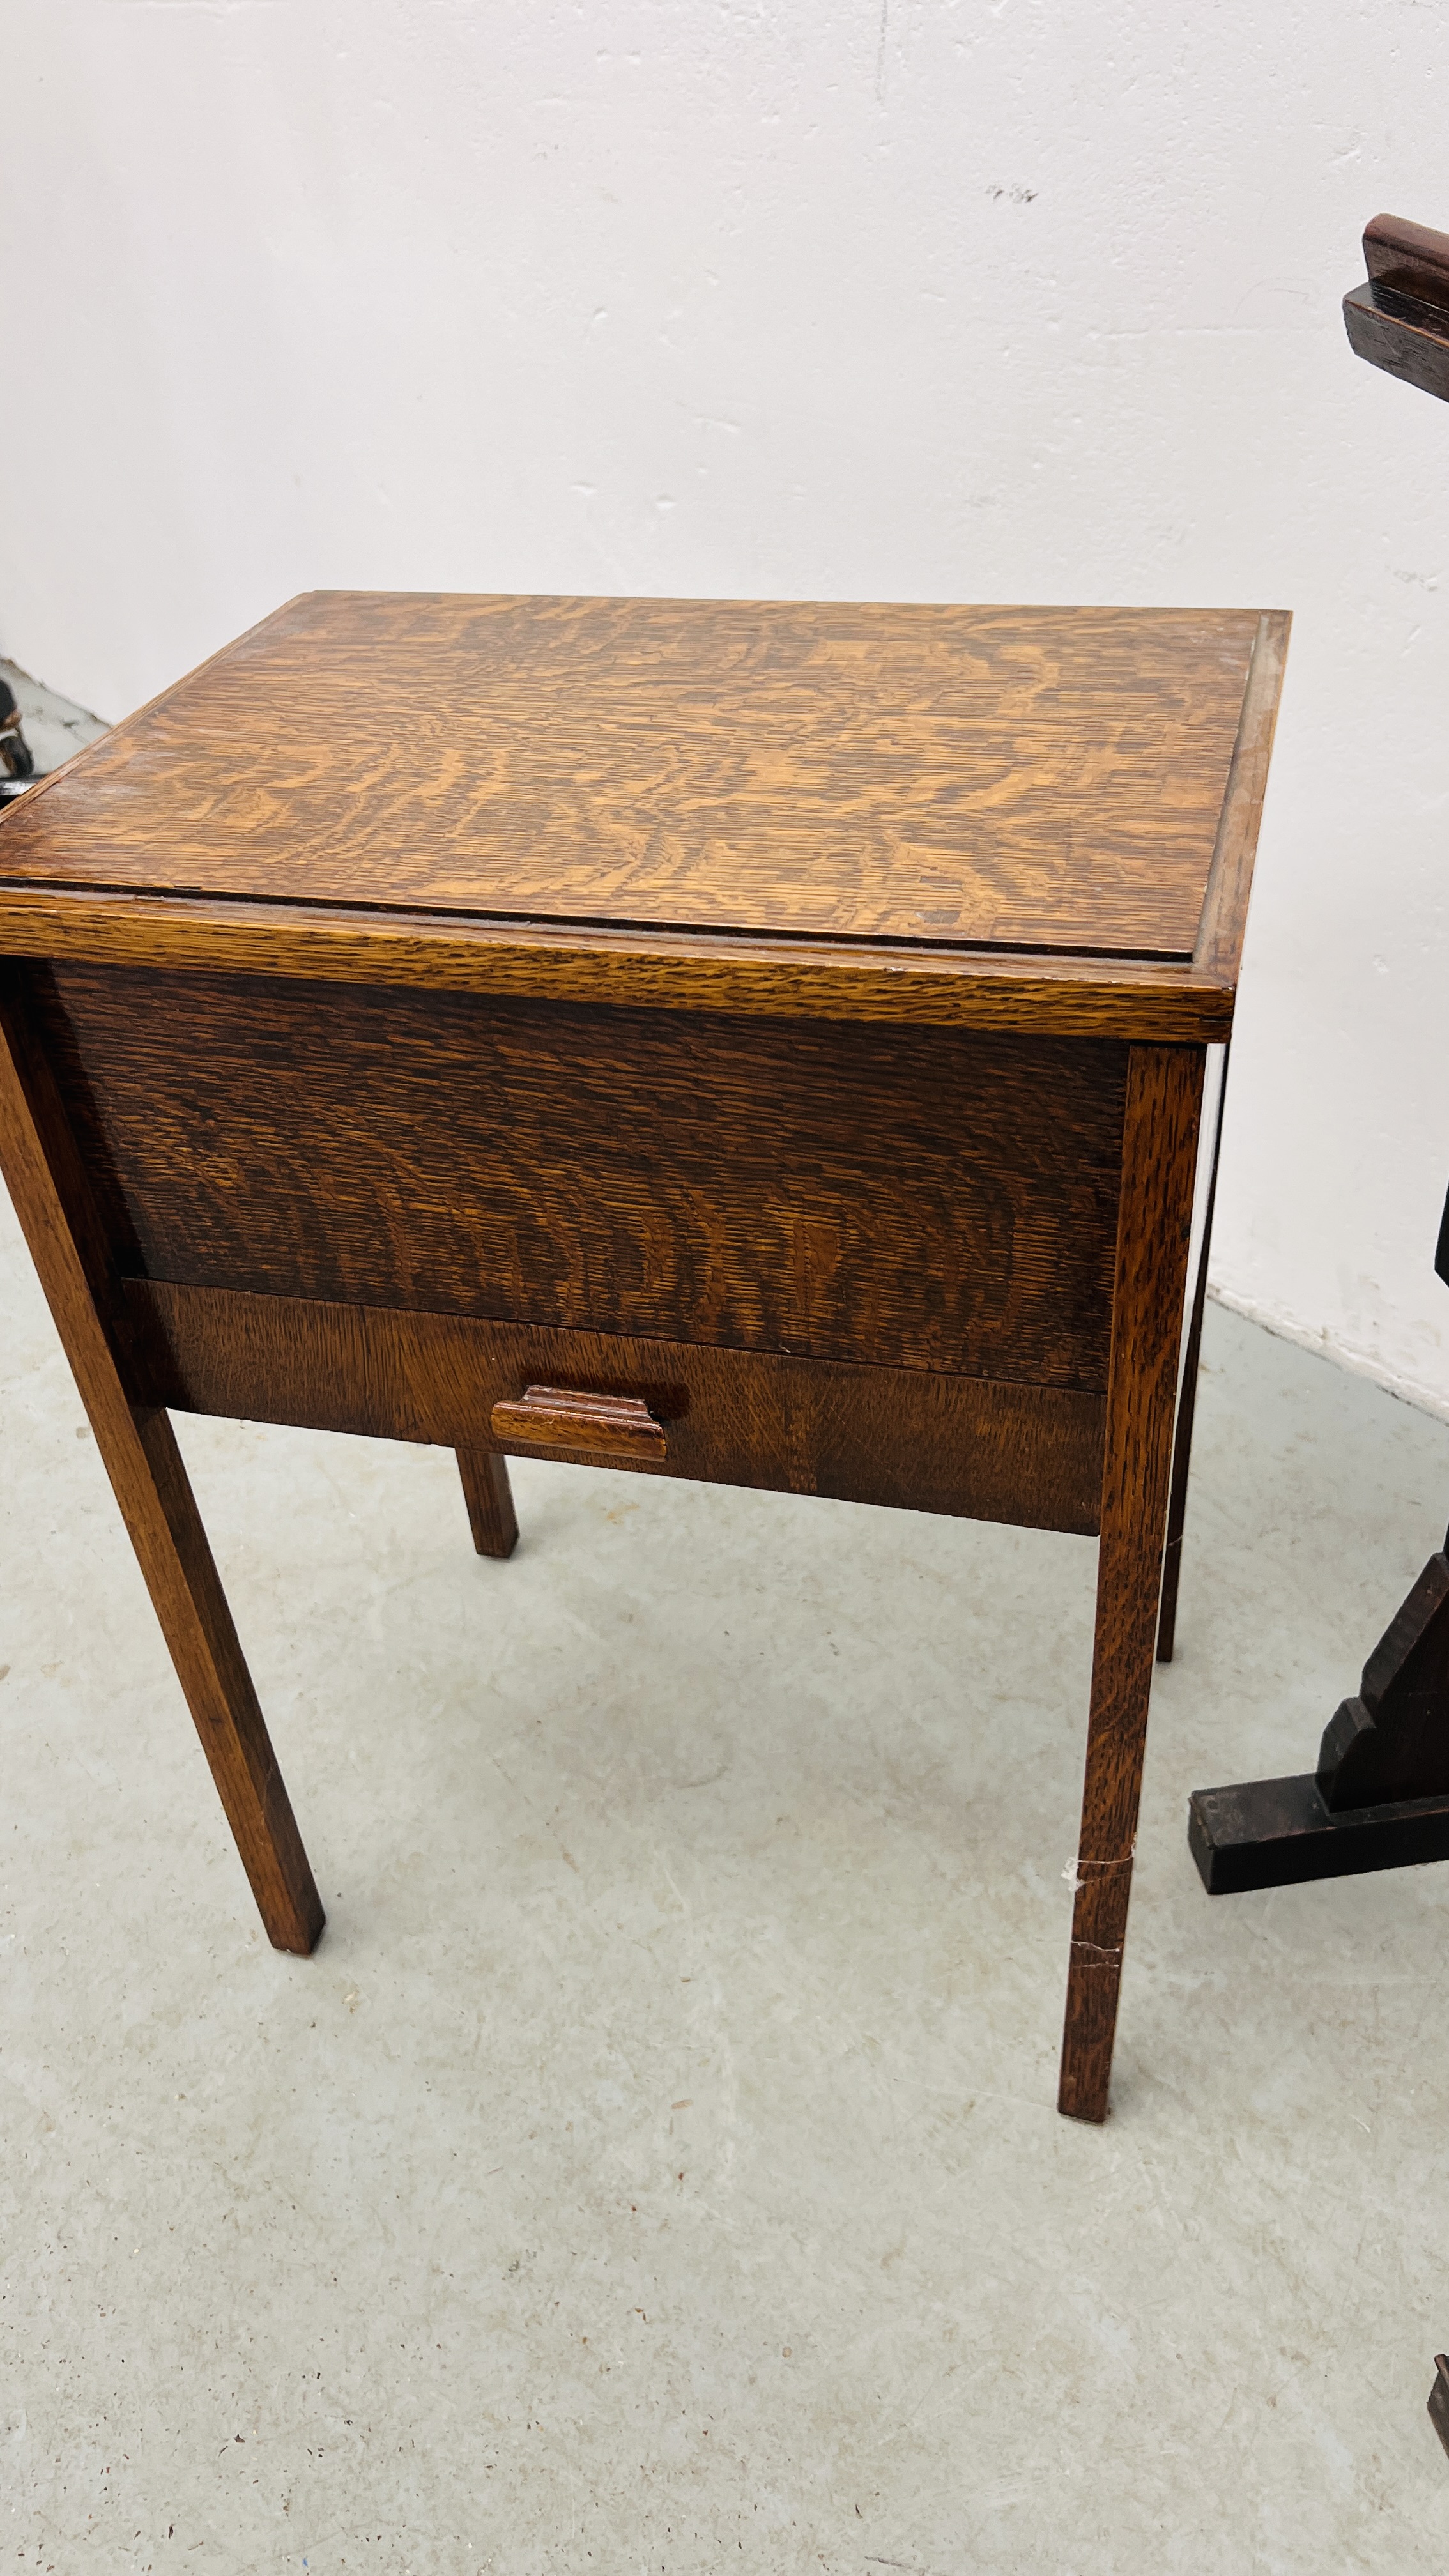 A VINTAGE SEWING BOX ALONG WITH A VINTAGE OAK BIBLE STAND. - Image 5 of 7